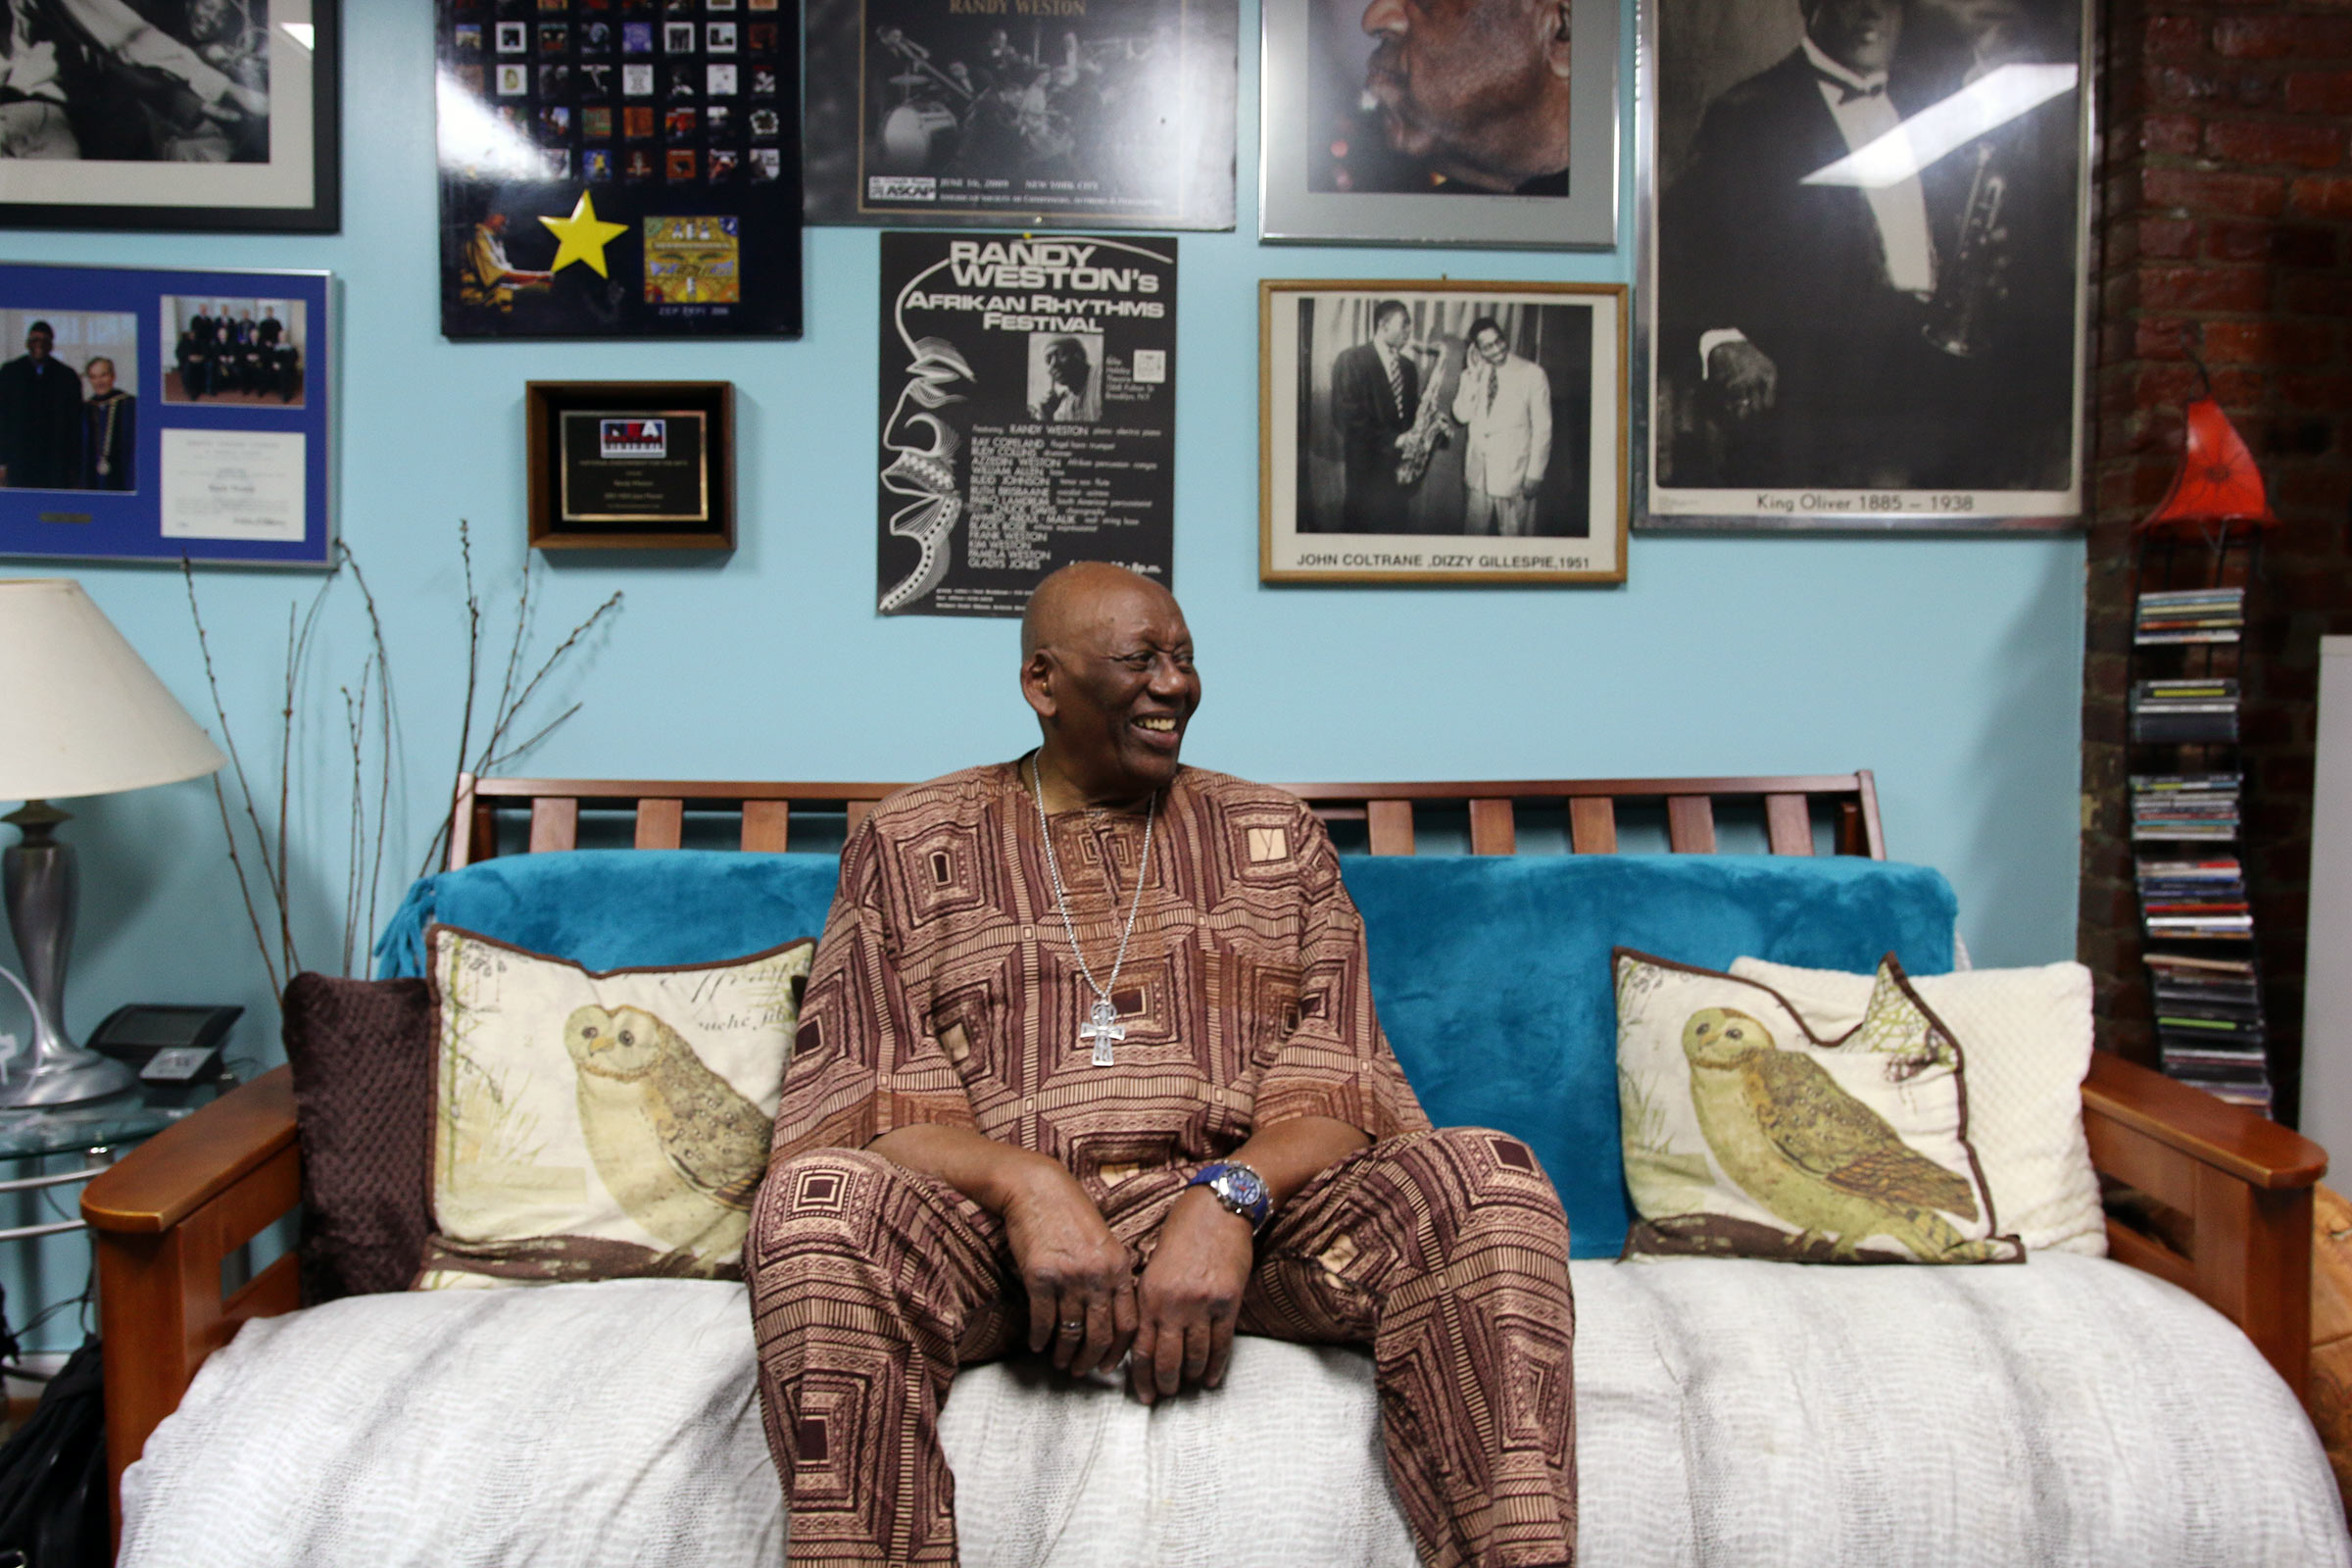 Randy Weston sitting on his couch om front of many framed posters from performances, awards, etc.